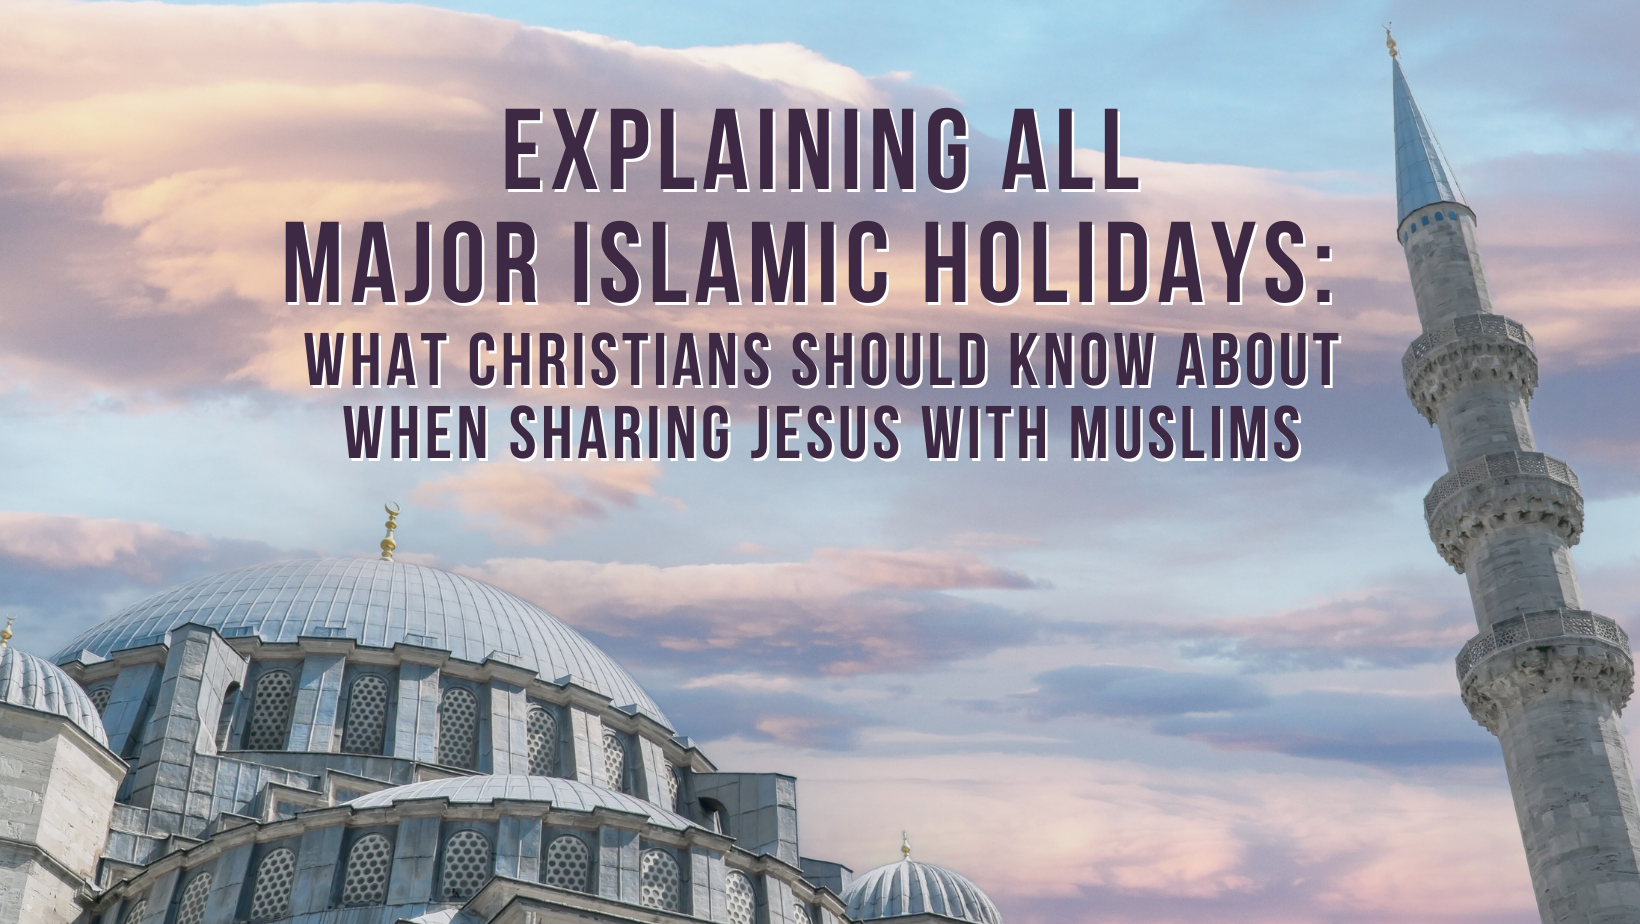 Explaining all major Islamic holidays: What Christians should know about when sharing Jesus with Muslims